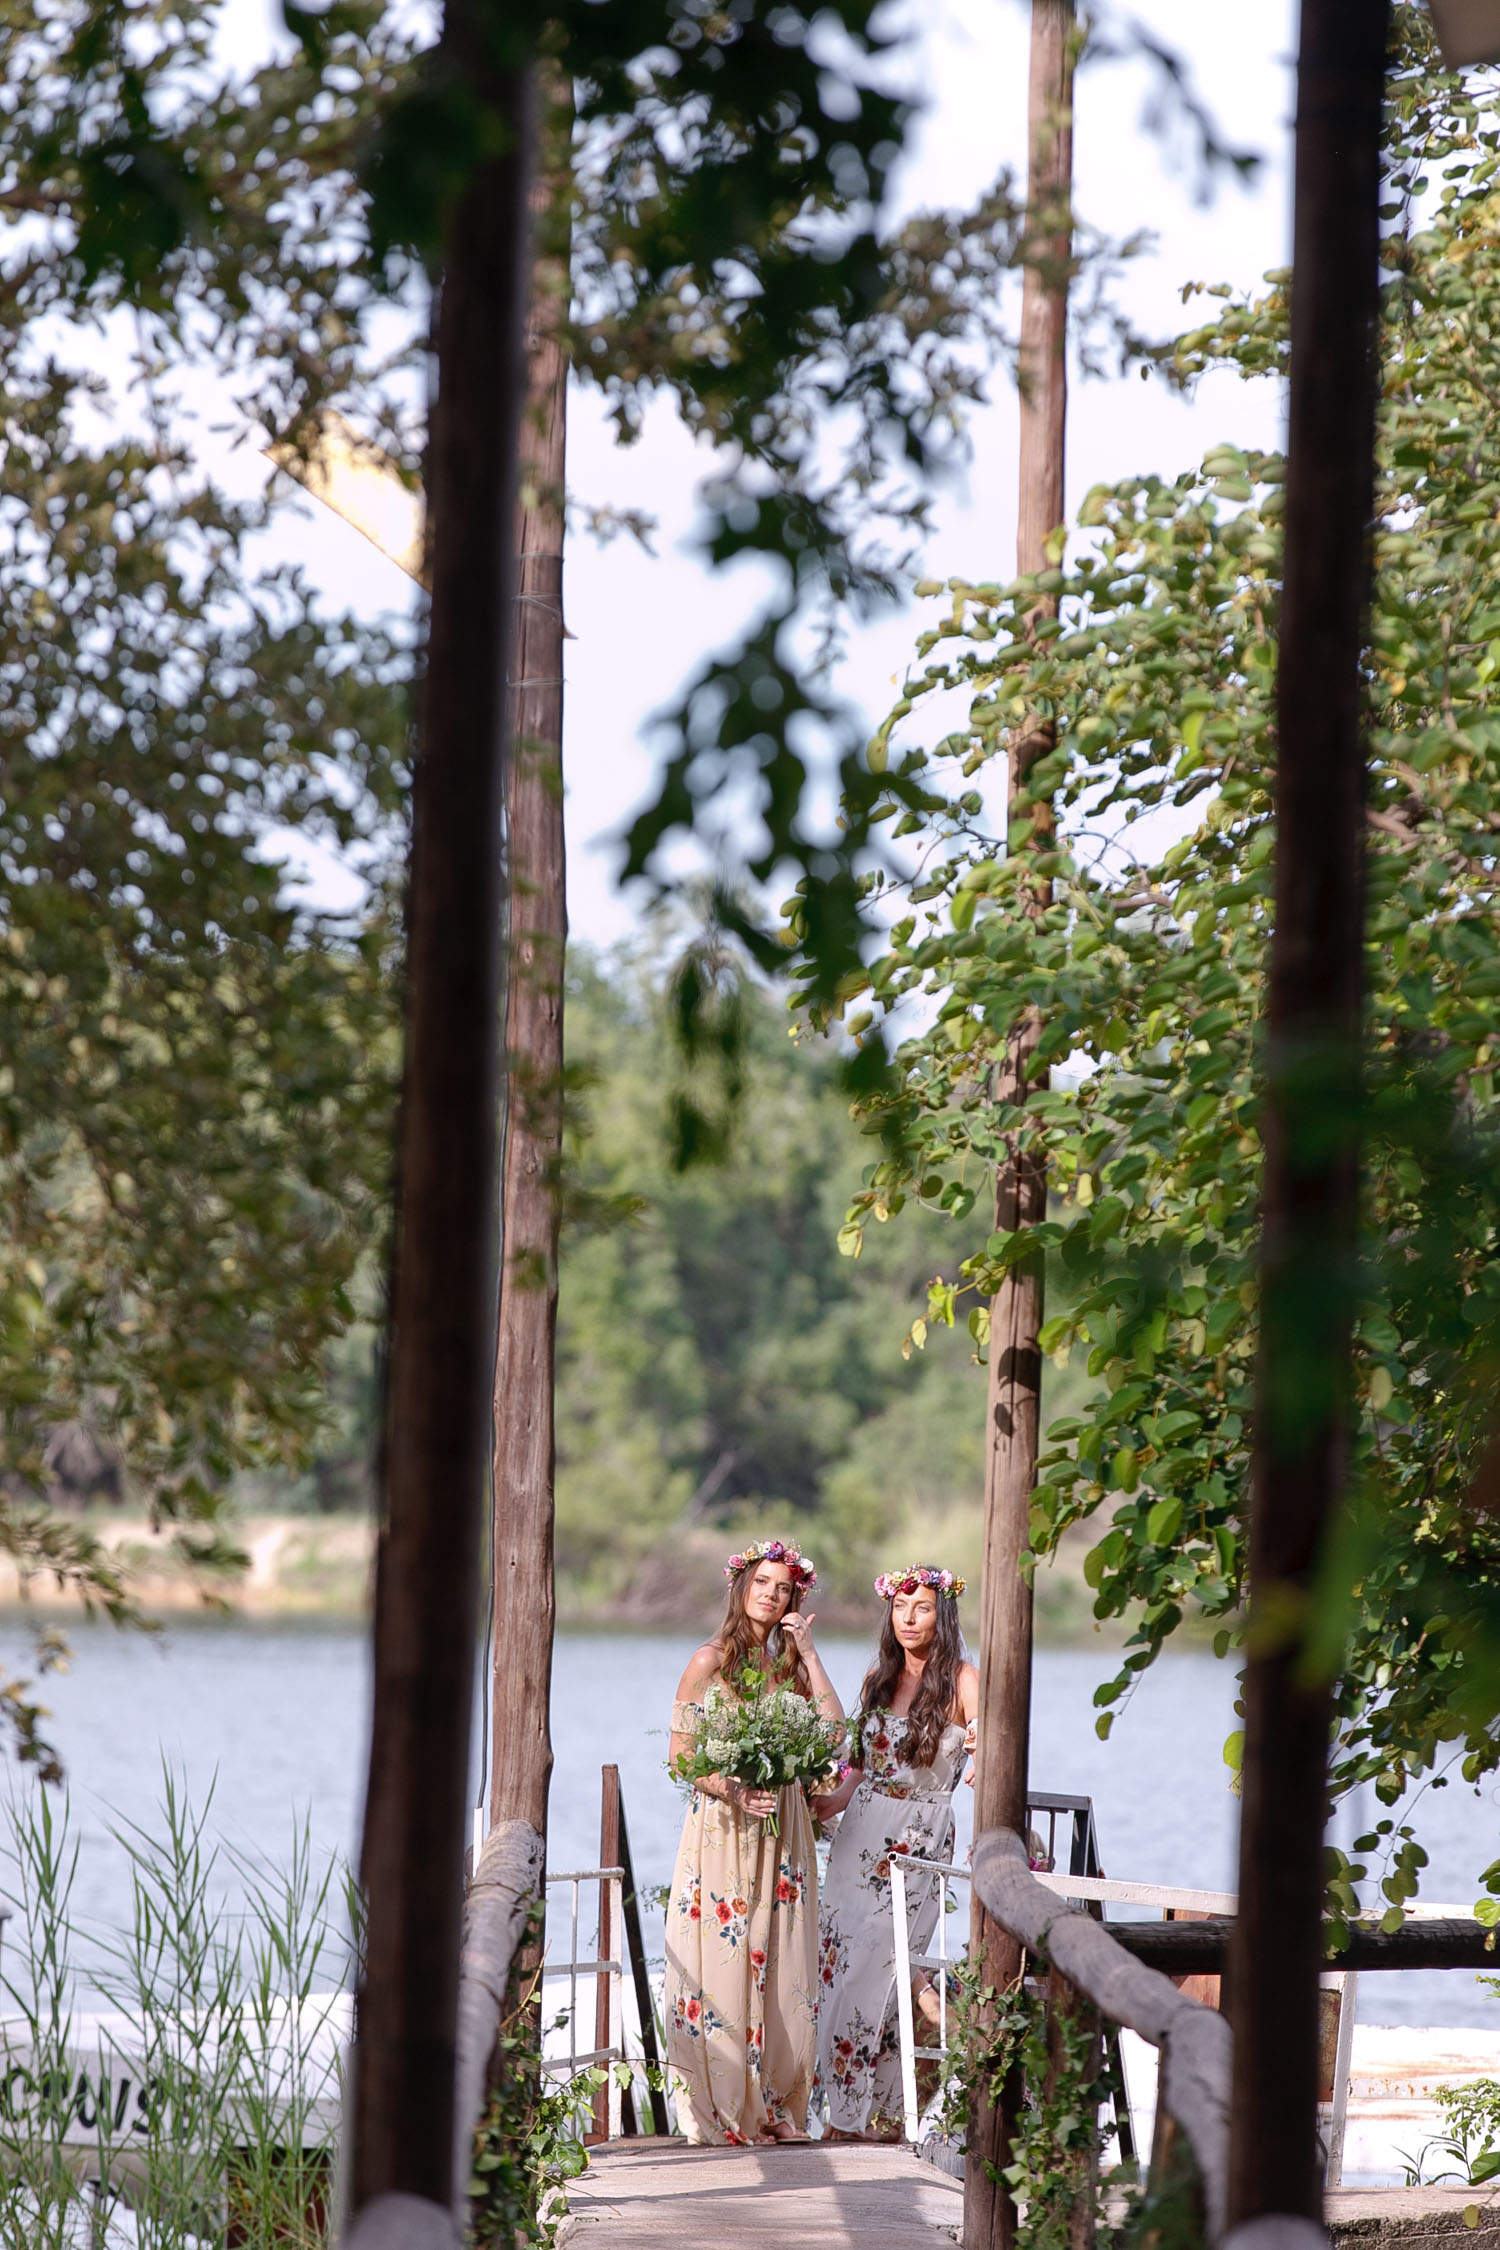 bridesmaids in pretty floral dresses waiting on the banks of the Zambezi River in Zimbabwe